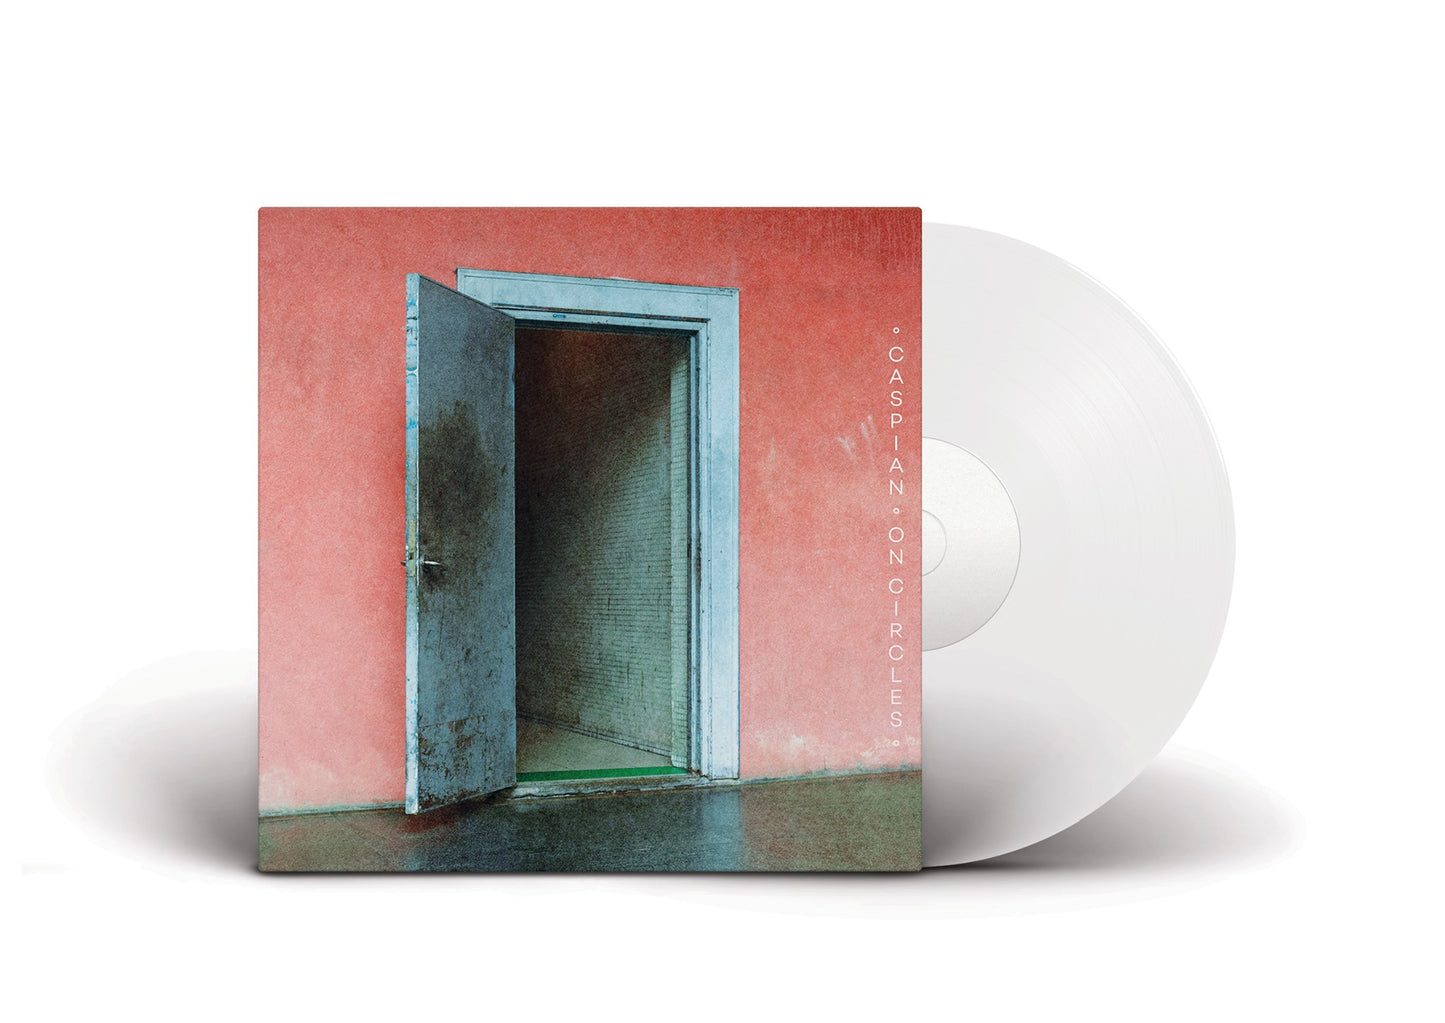 Caspian - On Circles (Limited Edition of 300 on Double White Vinyl)